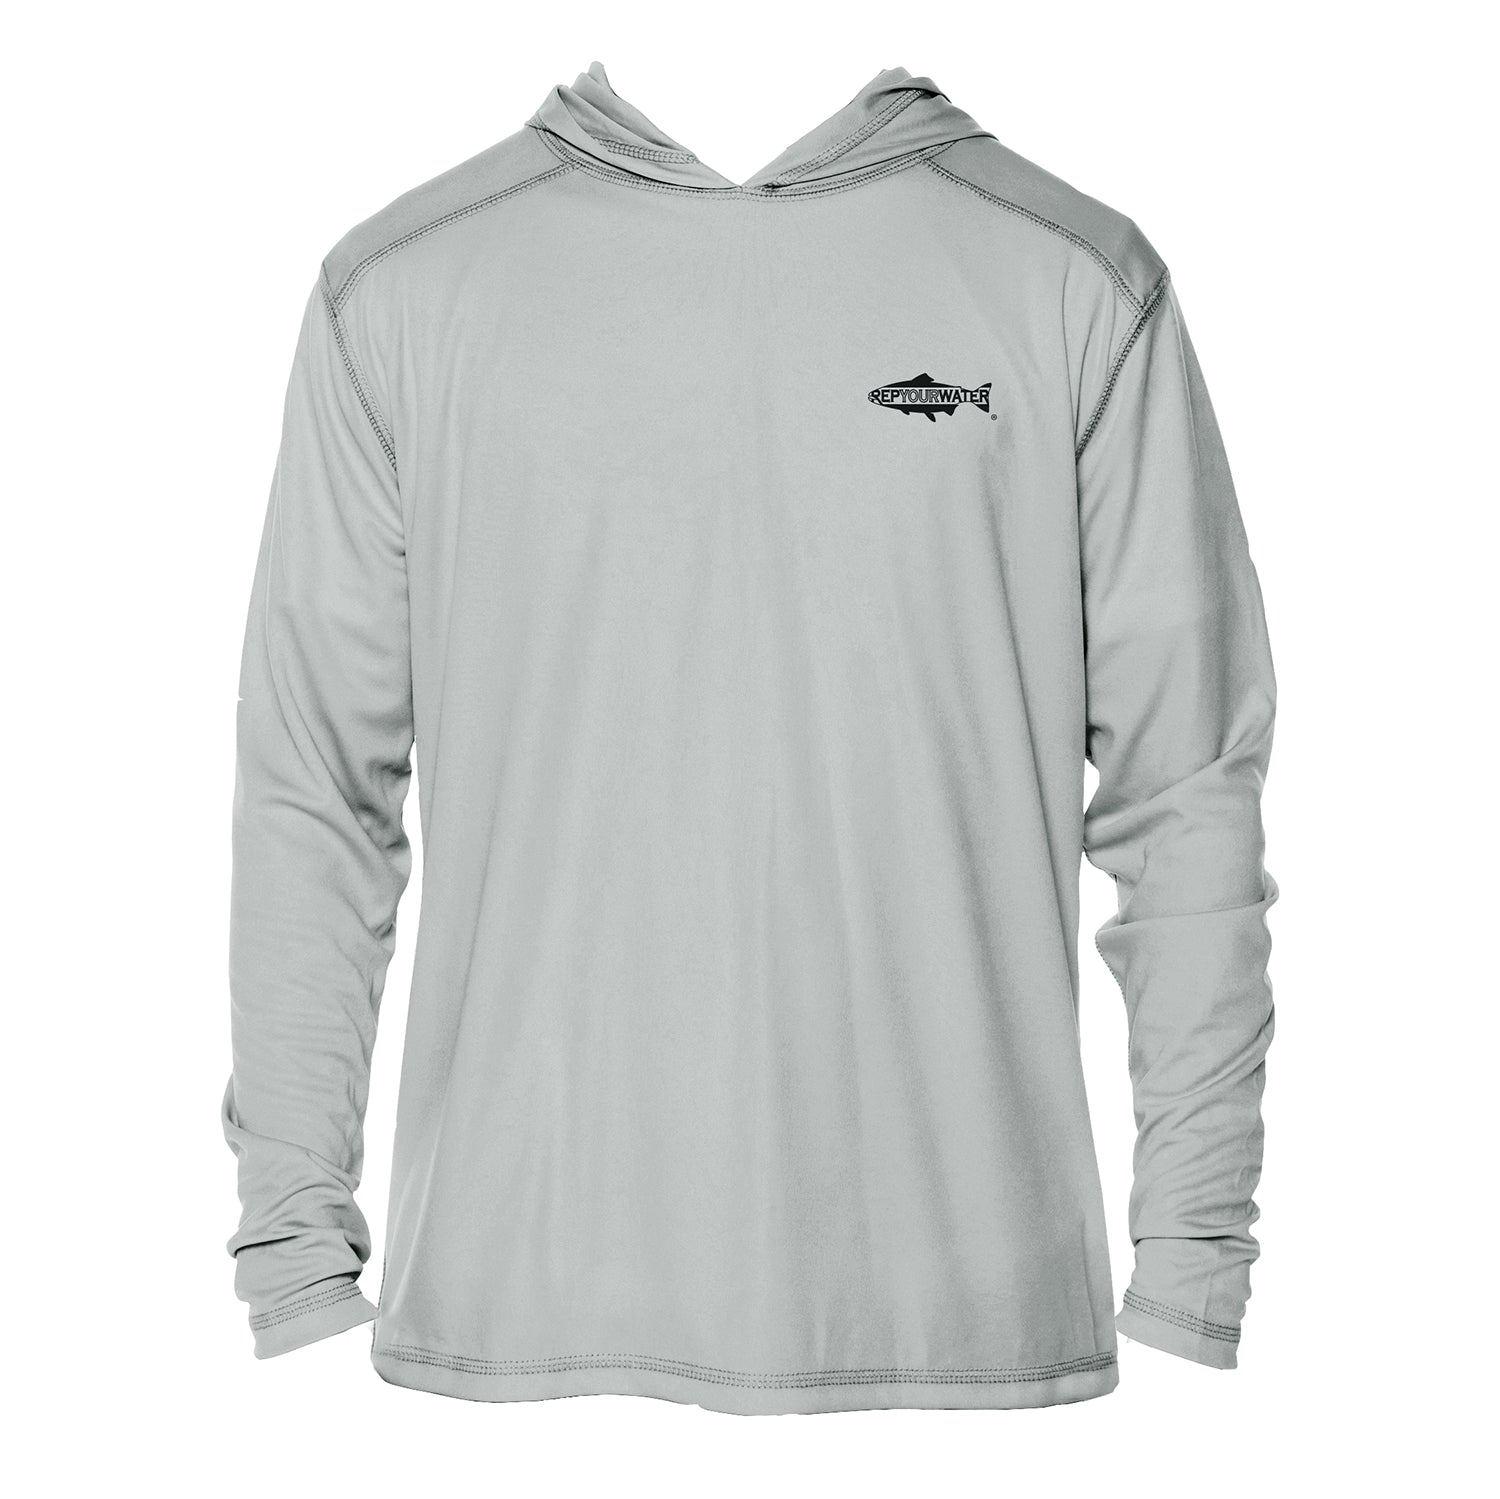 The front of a hooded long sleeved shirt has a logo that reads repyourwater inside the silhouette of a trout